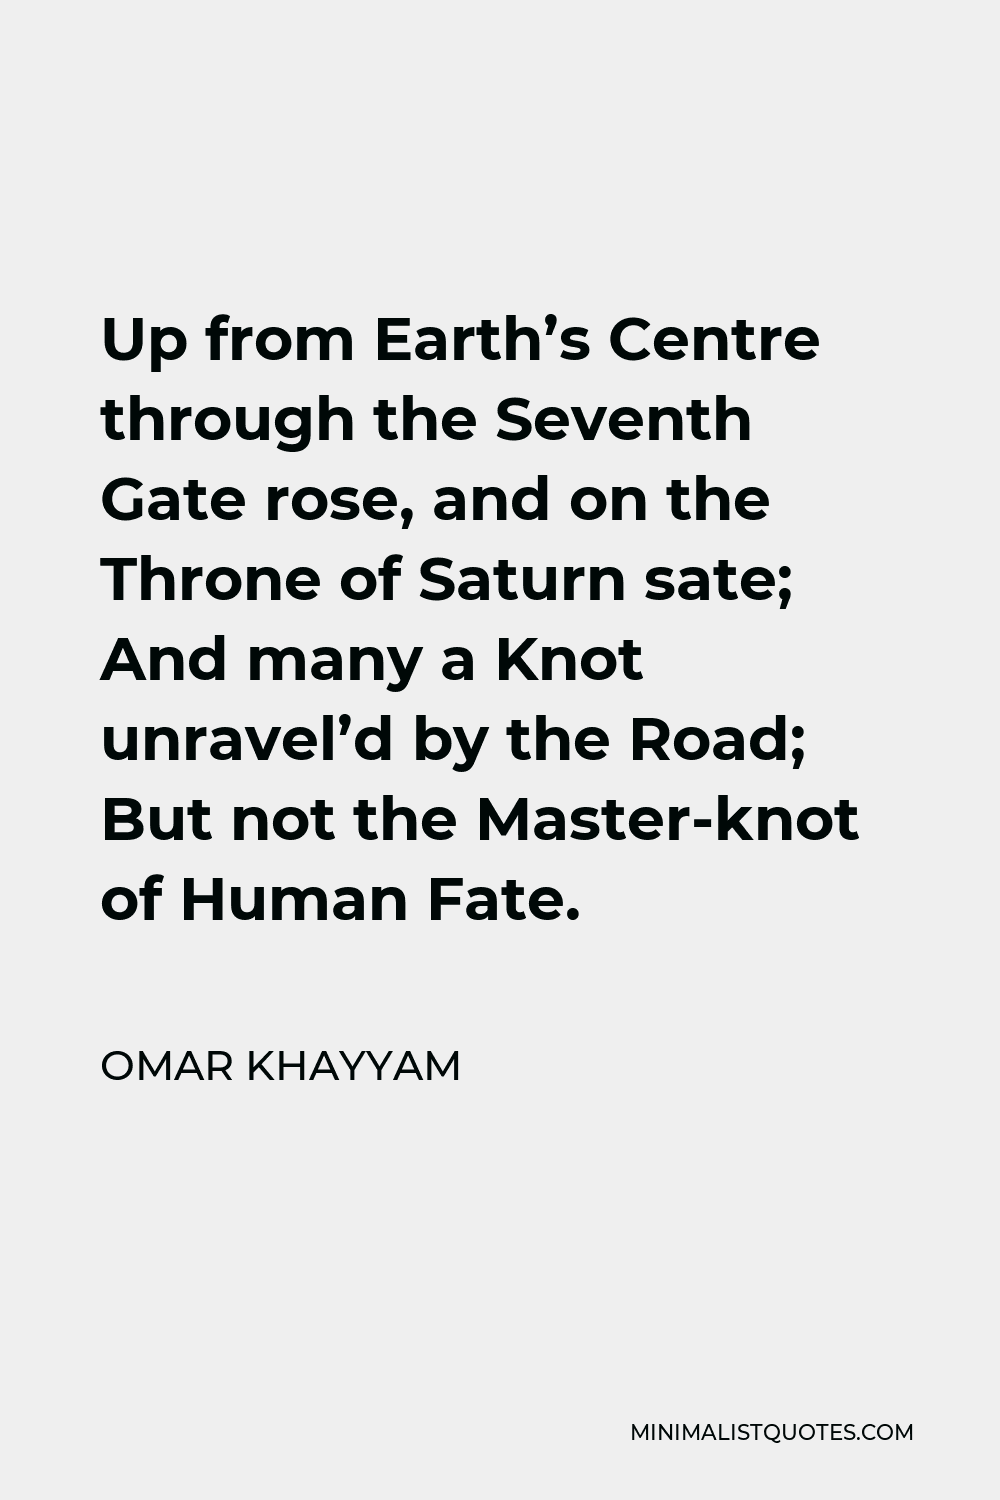 Omar Khayyam Quote - Up from Earth’s Centre through the Seventh Gate rose, and on the Throne of Saturn sate; And many a Knot unravel’d by the Road; But not the Master-knot of Human Fate.